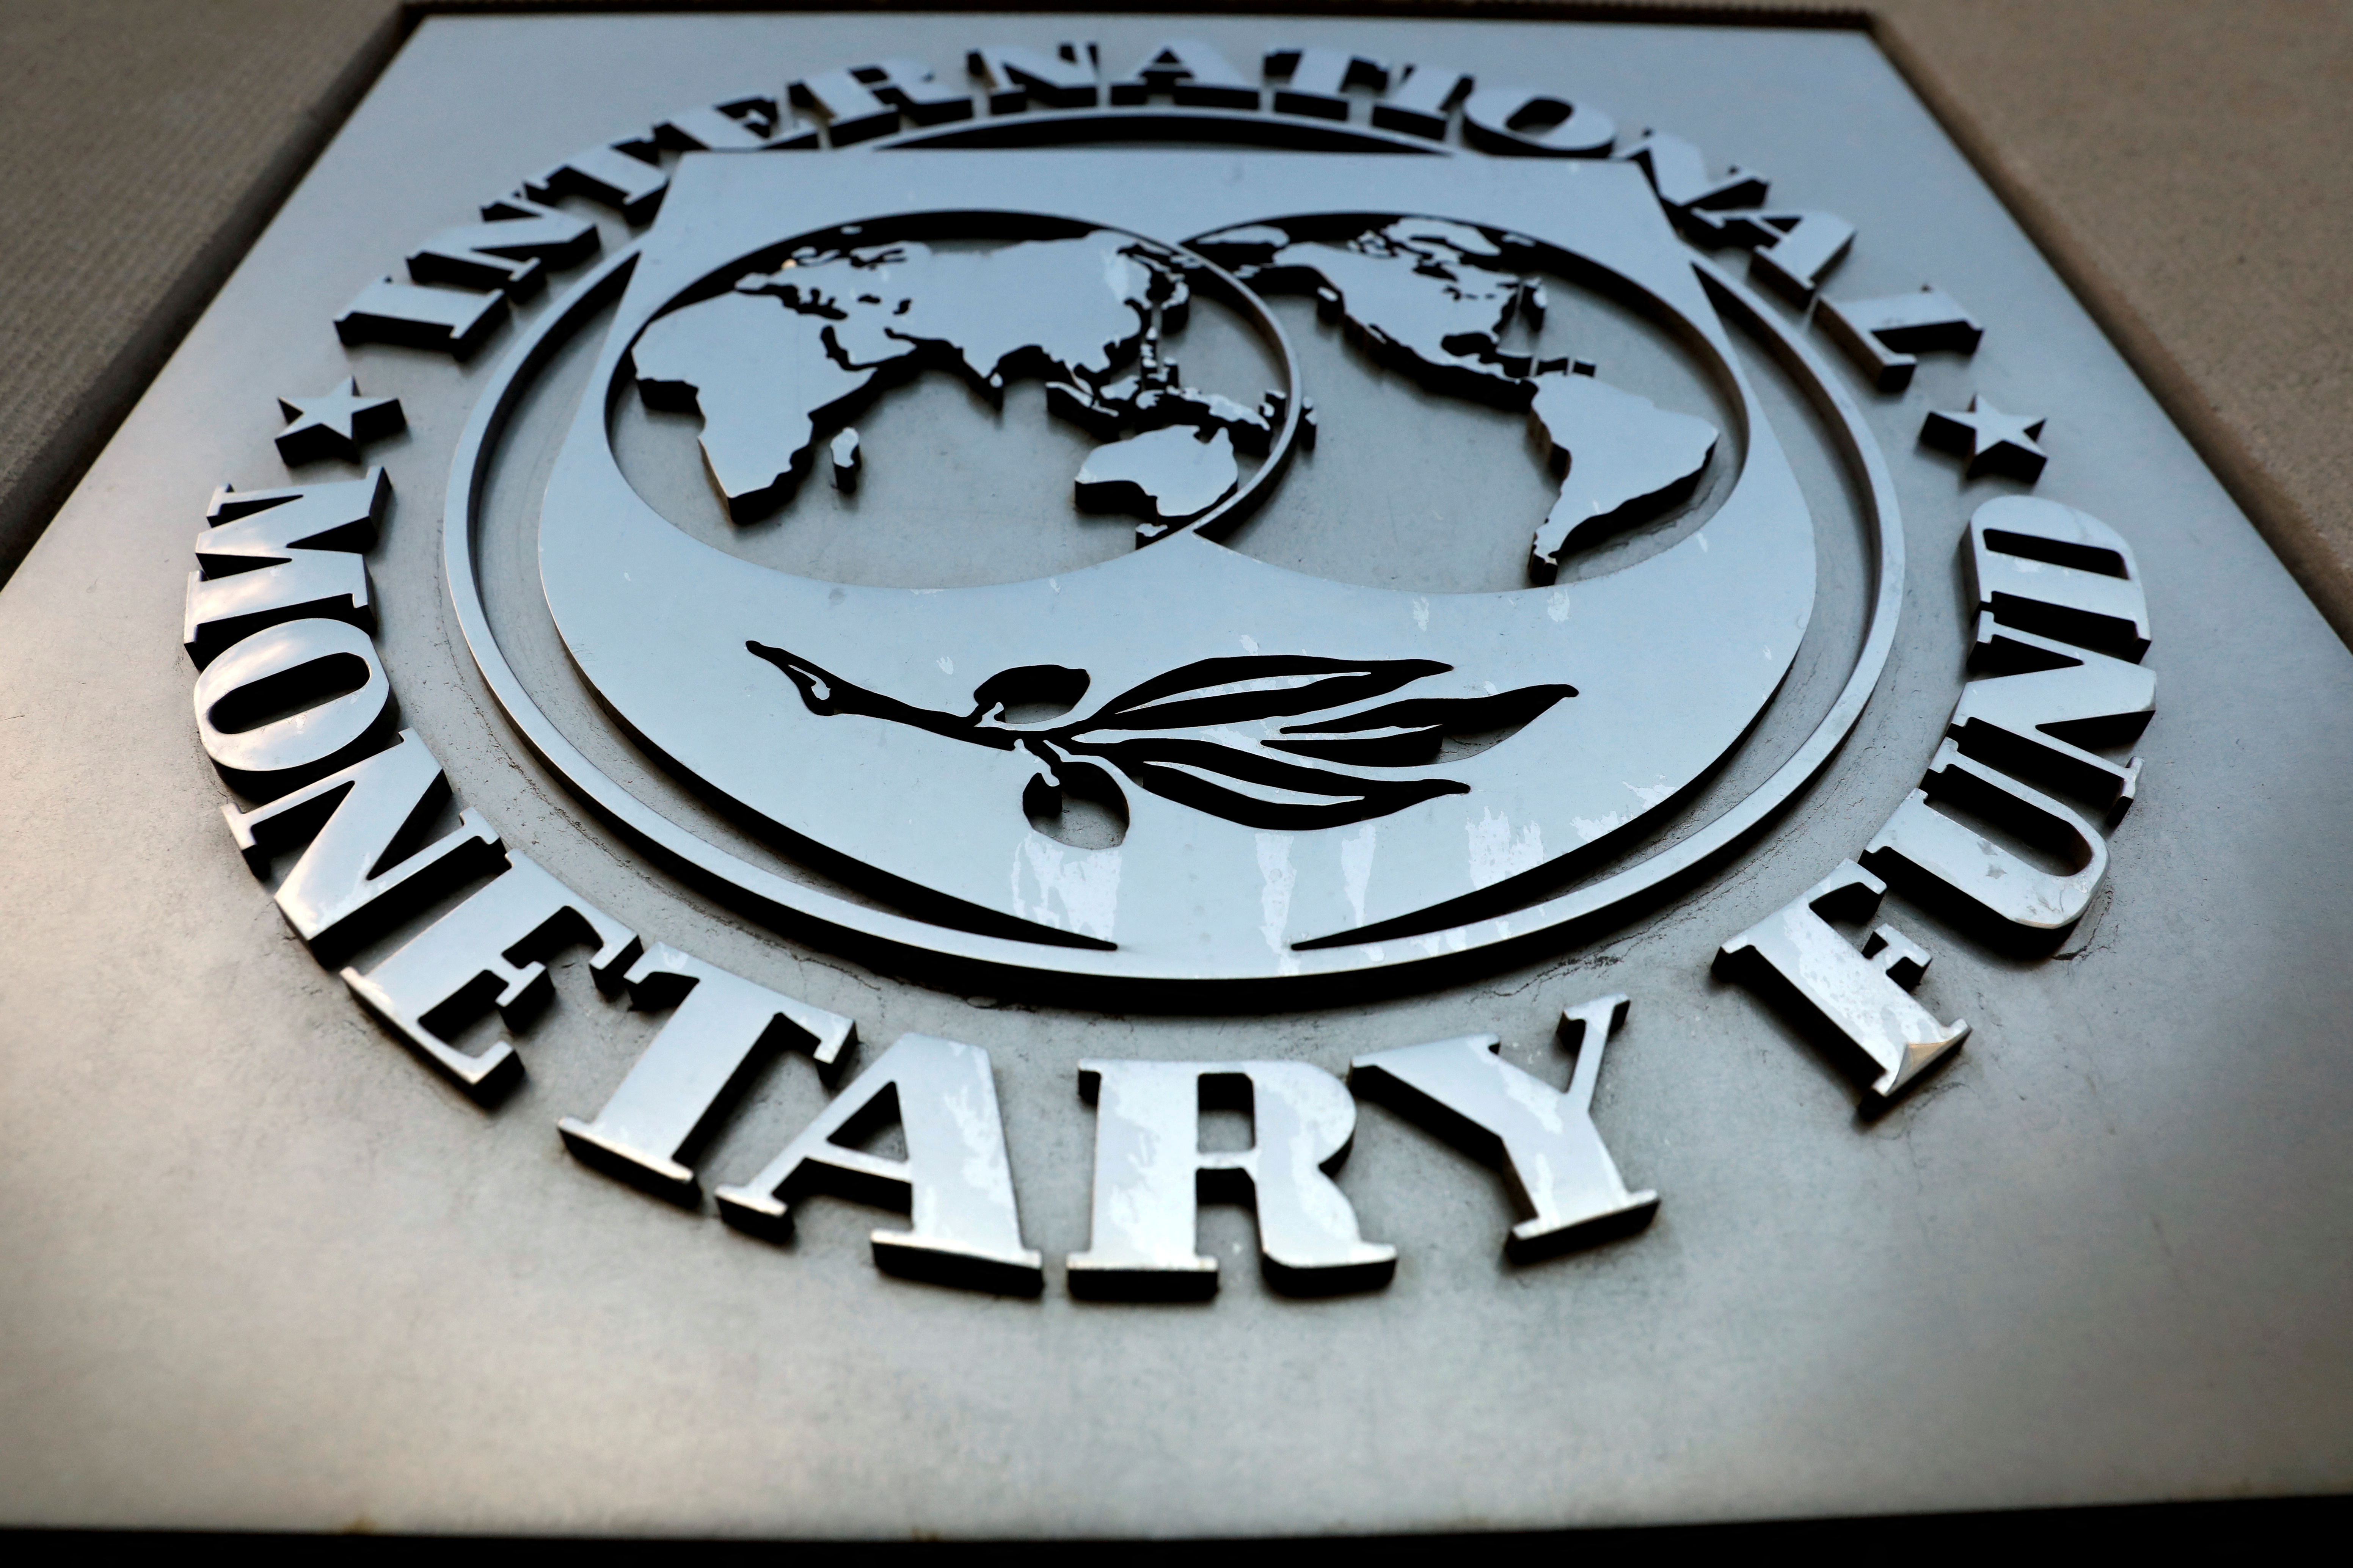 South Africa and the IMF